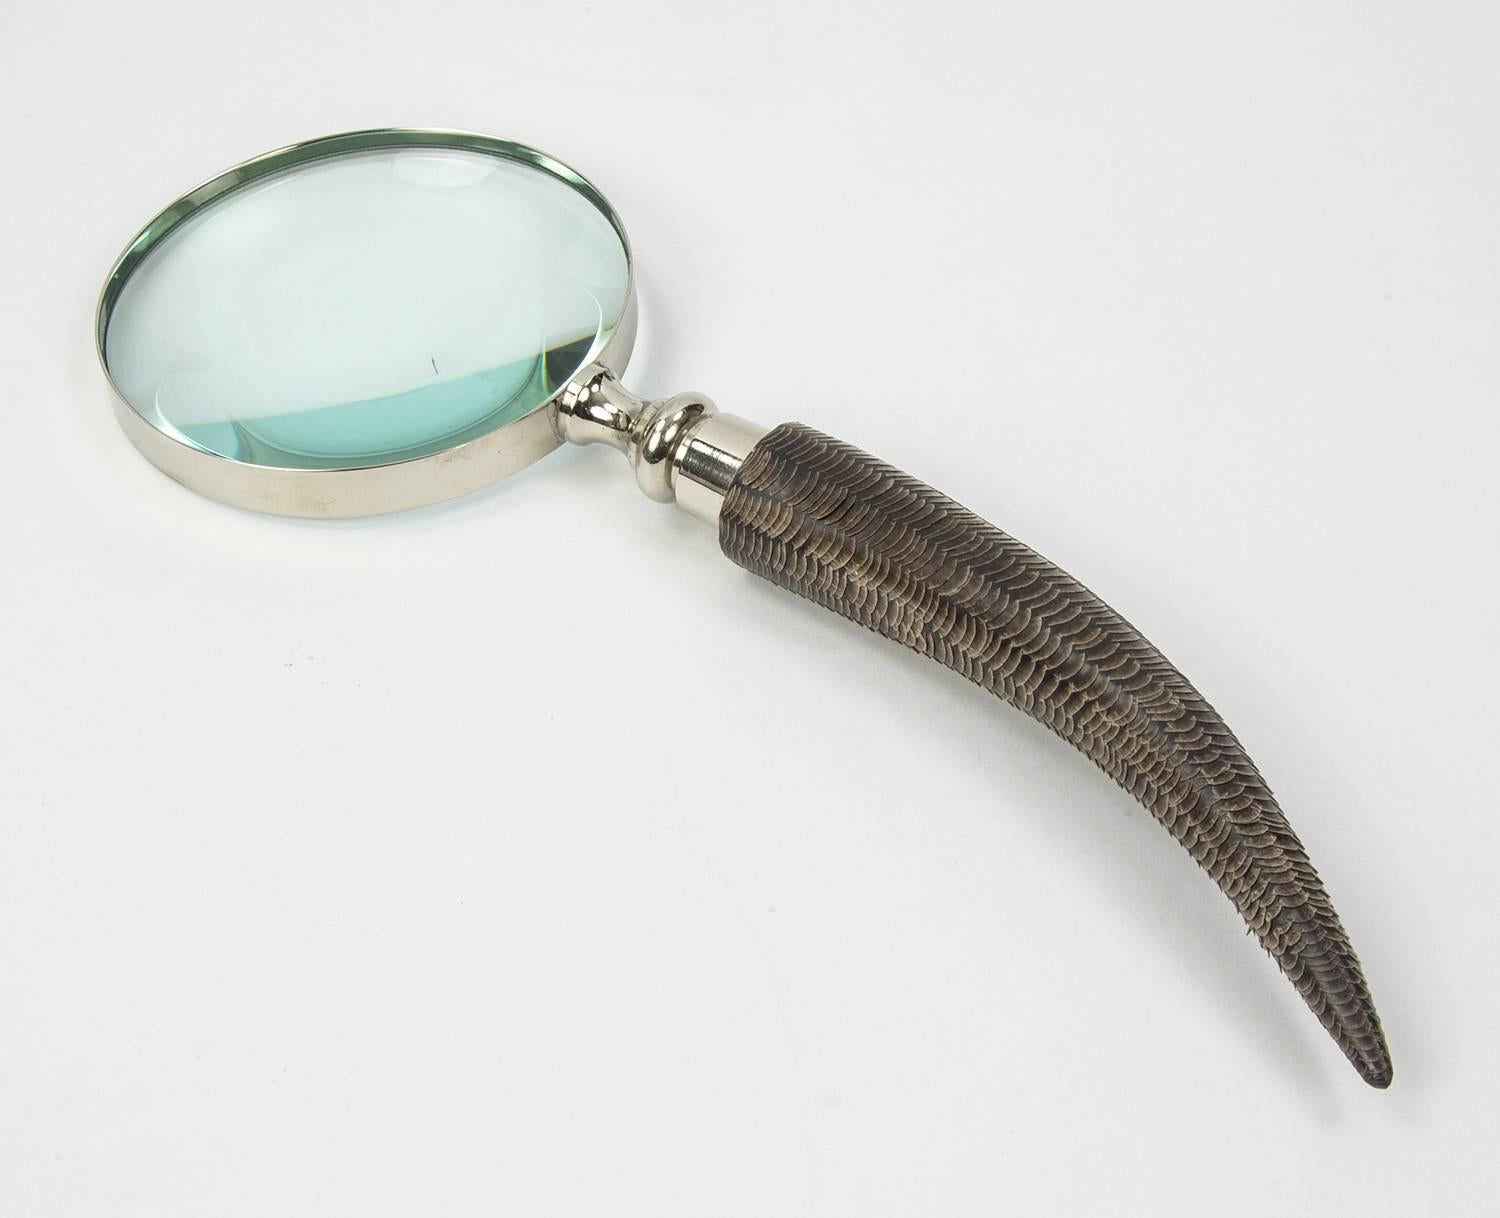 Featuring a curved celluloid handle with applied fish scale pattern magnifier; approximate 11.25” long; chrome rimmed magnifying glass measures approximate 4” in diameter; Modernistic, Avant-garde and functional. A perfect gift for that special